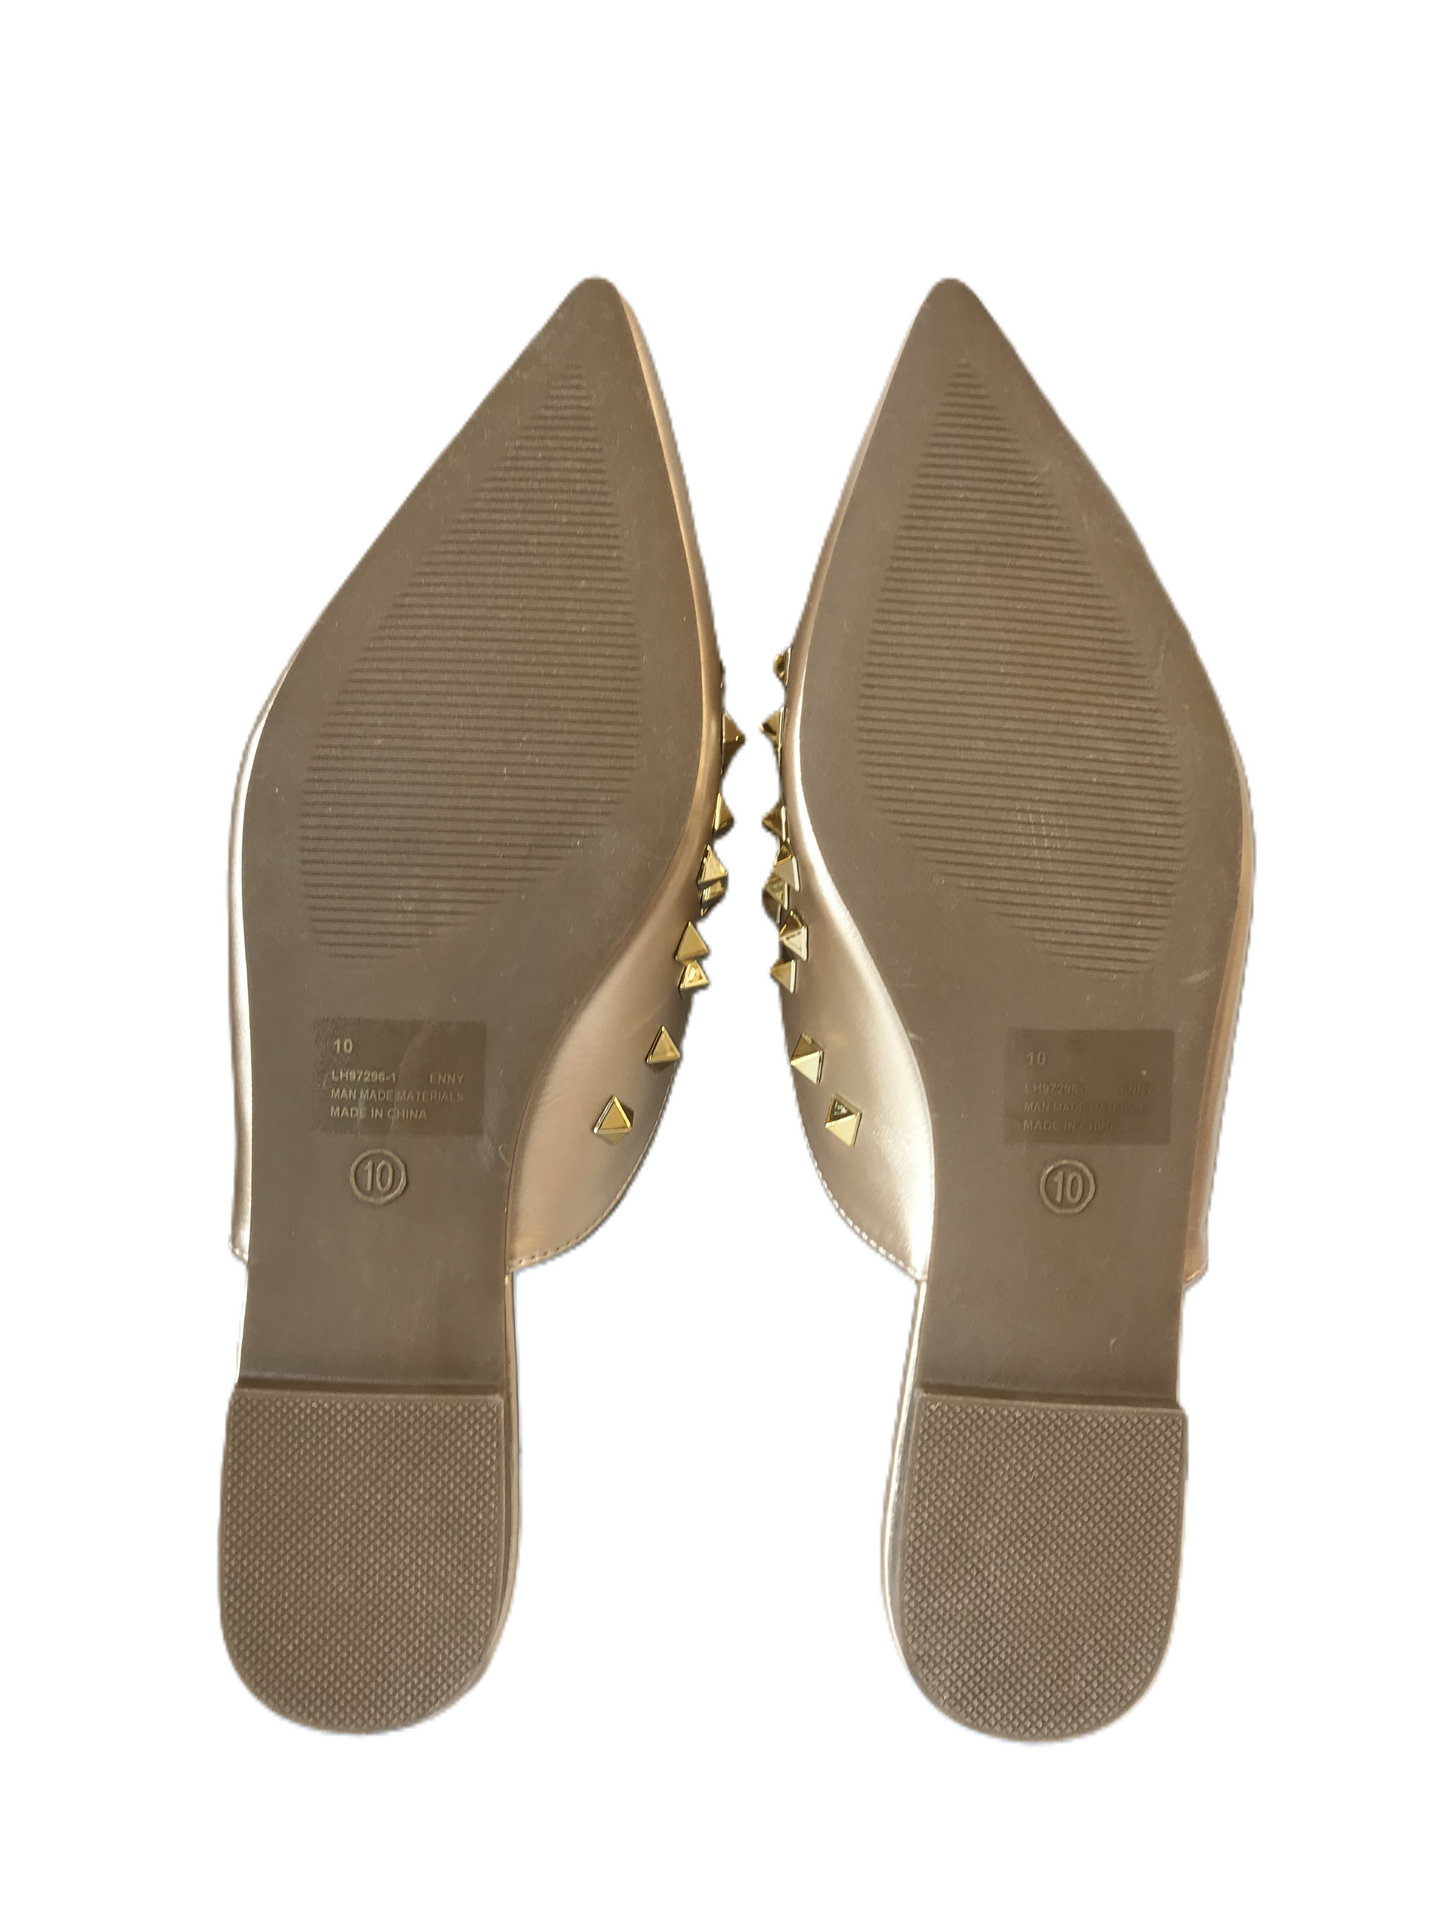 Gold Shoes Flats By Cape Robbin Size: 10